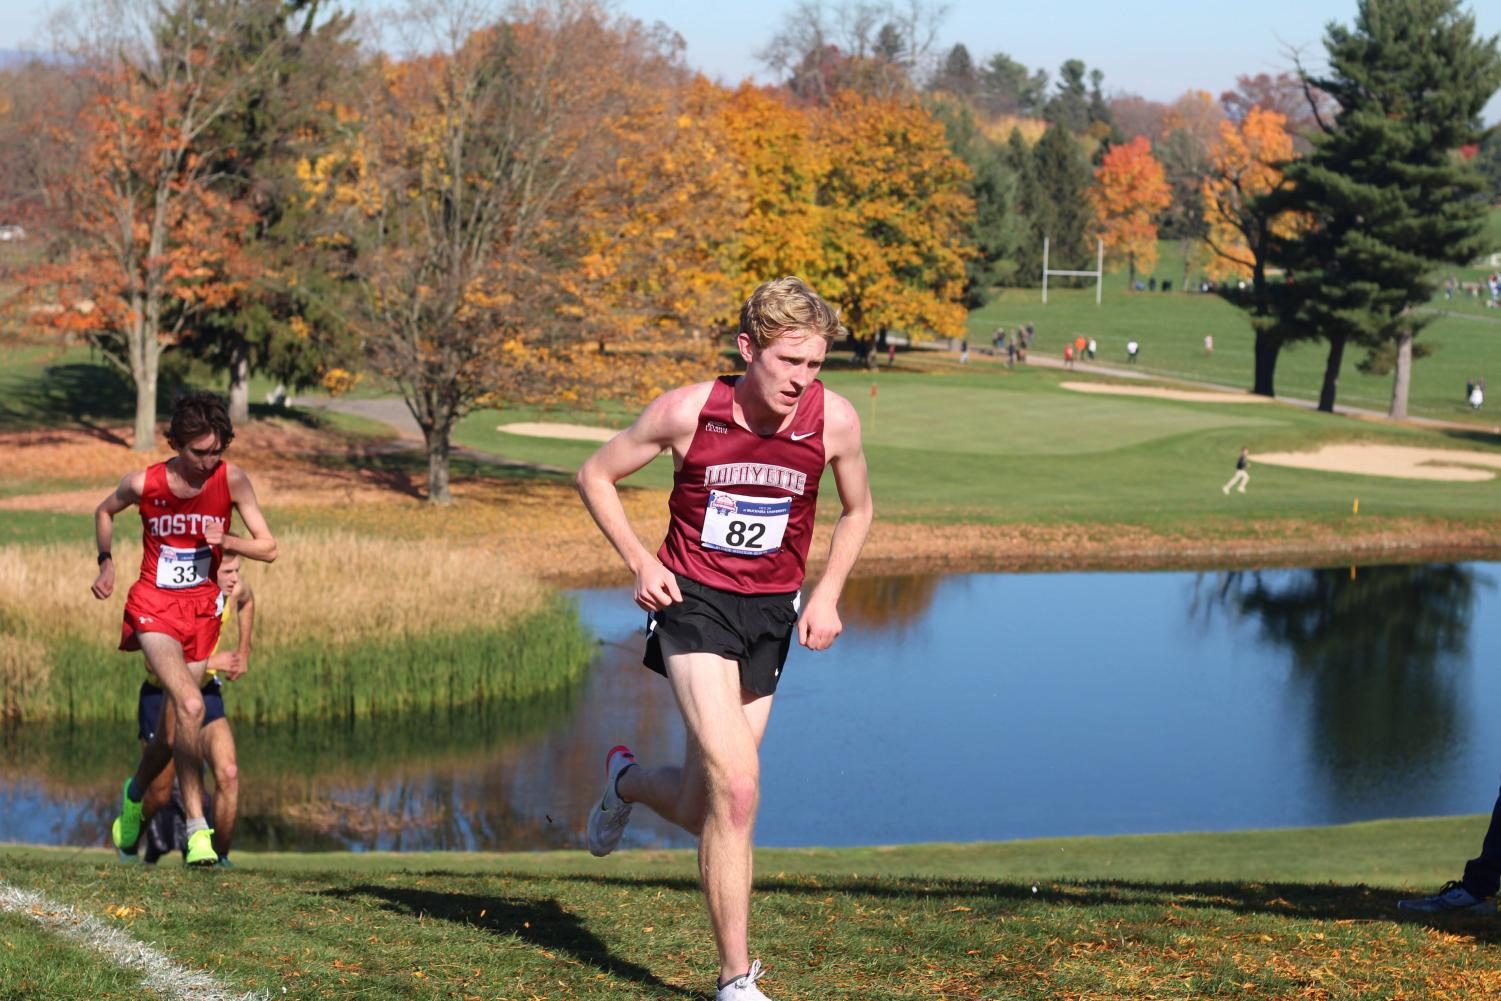 Oehrlein leads way for Leopards at Patriot League Cross Country